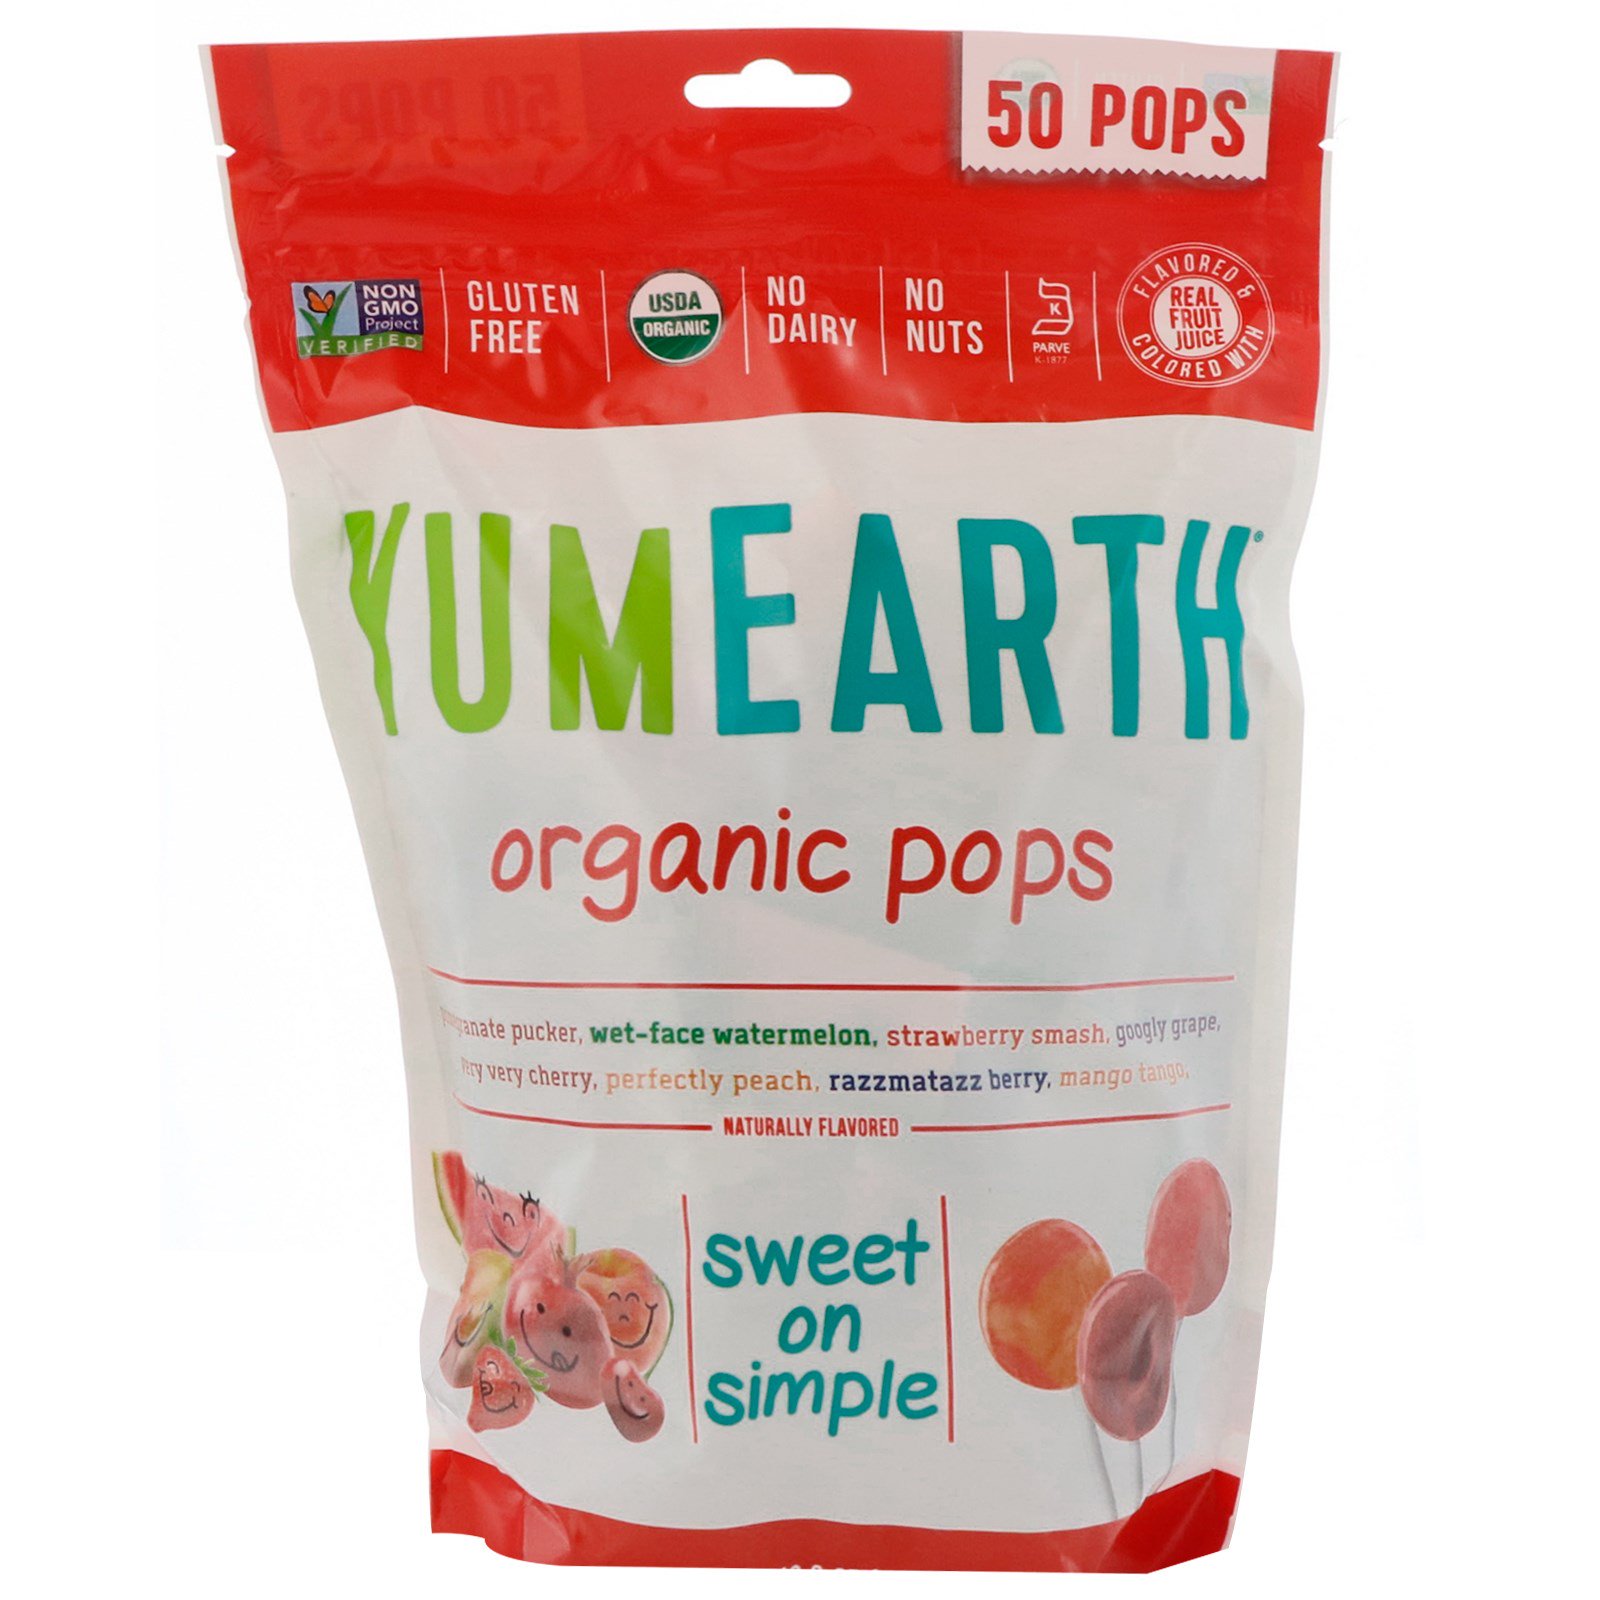 YumEarth, Organic Pops, Assorted Flavors, 50 Pops, 12.3 oz (348.7 g ...